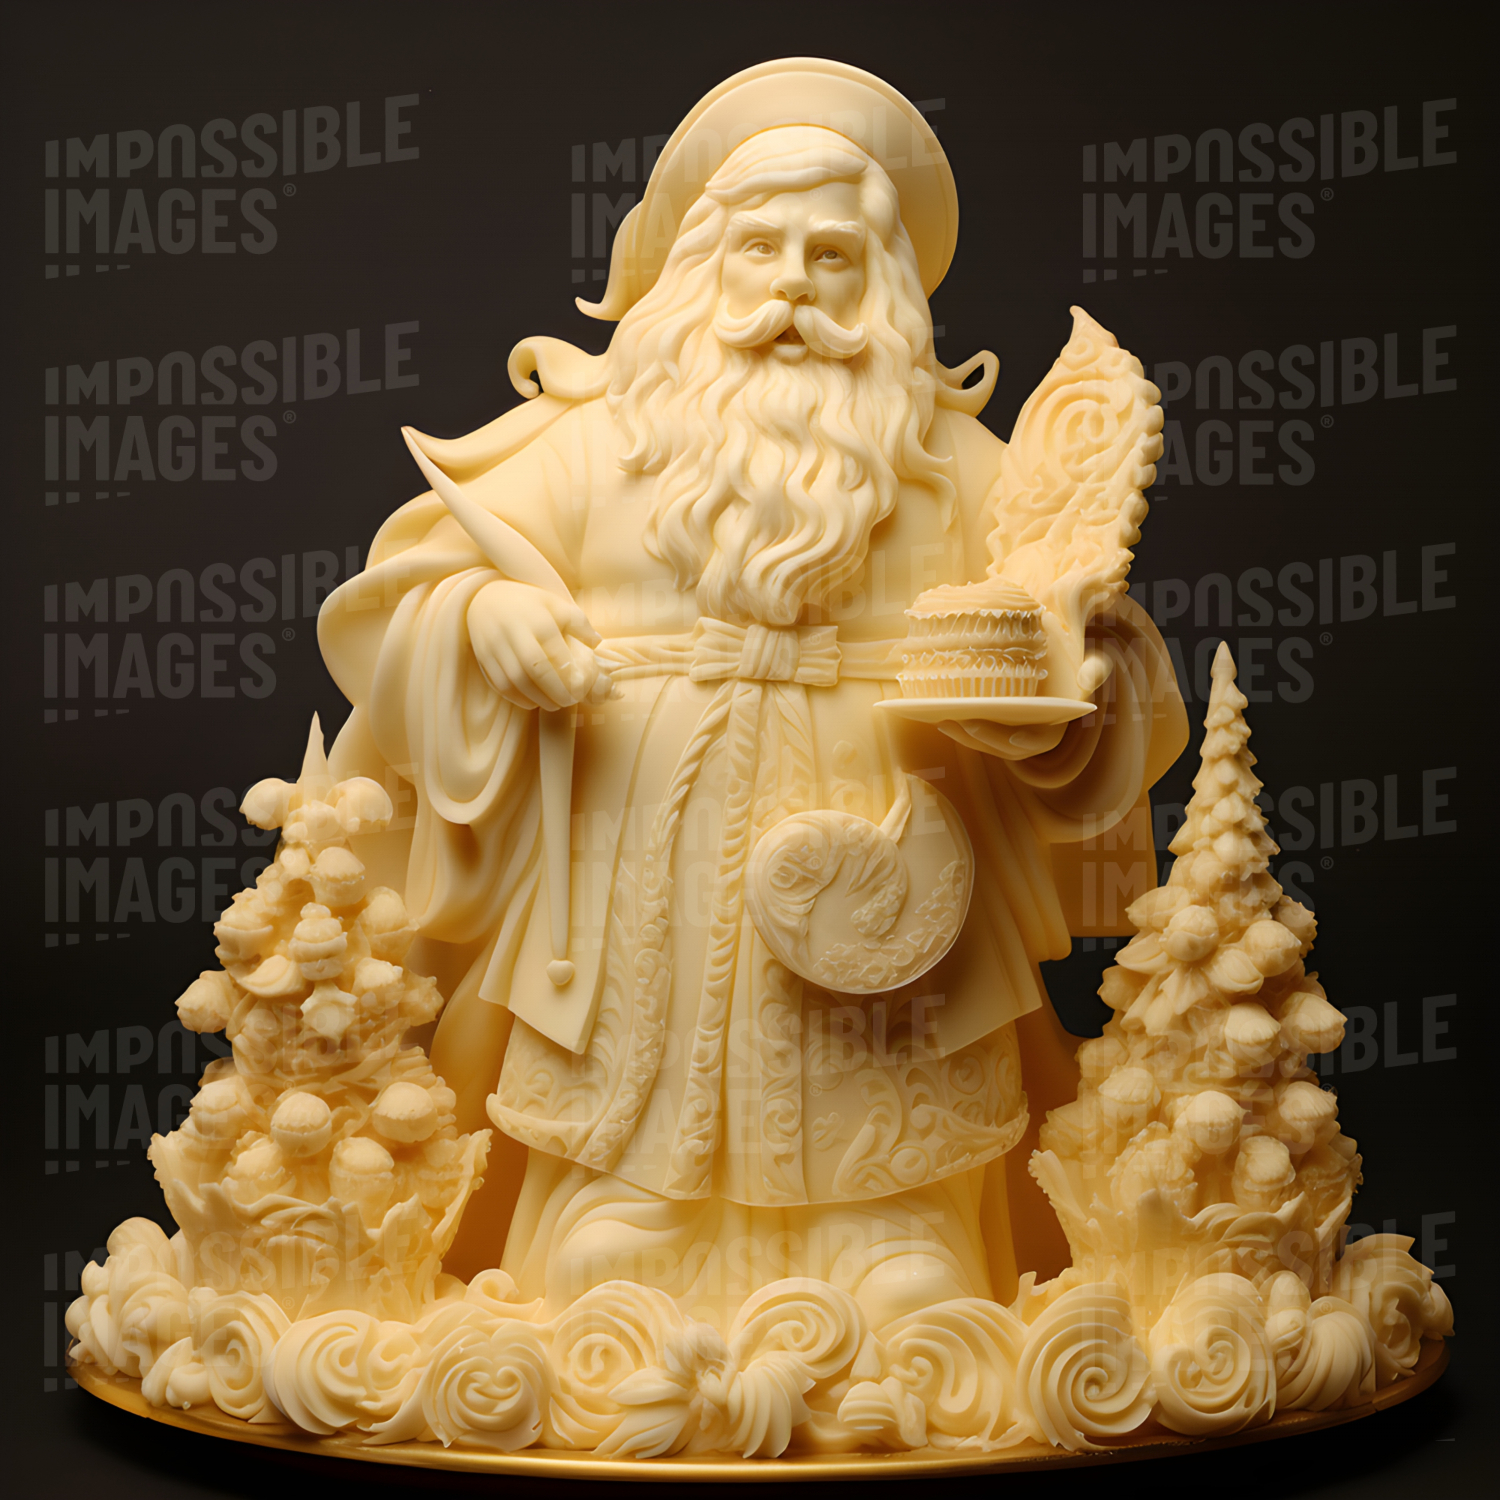 Santa carved from butter